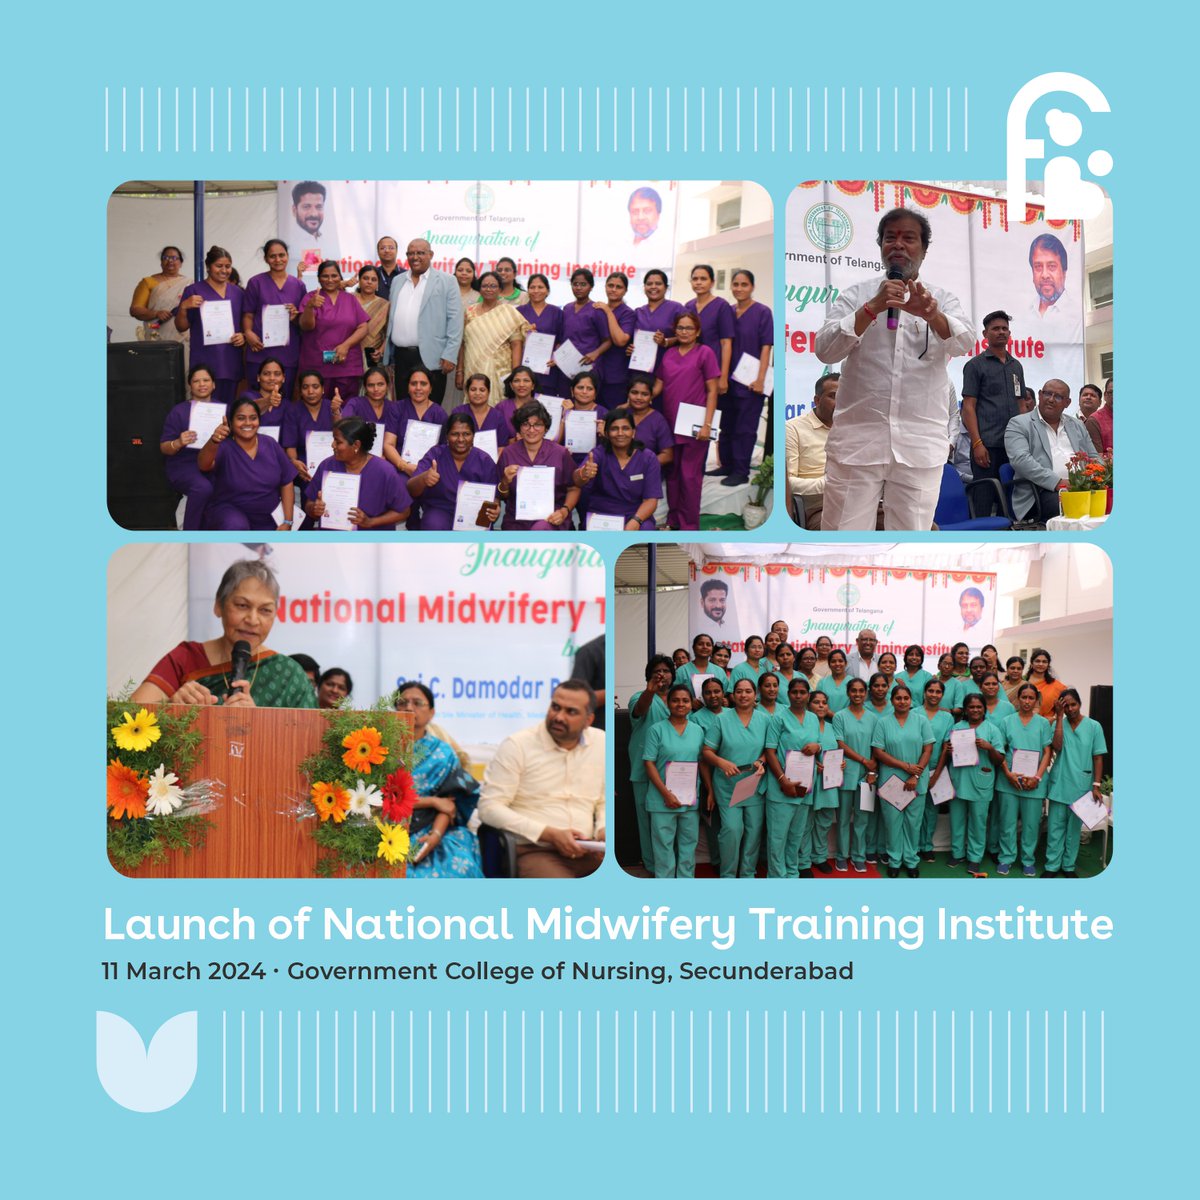 Congratulations Govt of Telangana on the launch of National Midwifery Training Institute! We are incredibly proud of the progress Telangana has made in improving the health of mothers and newborns across the state.